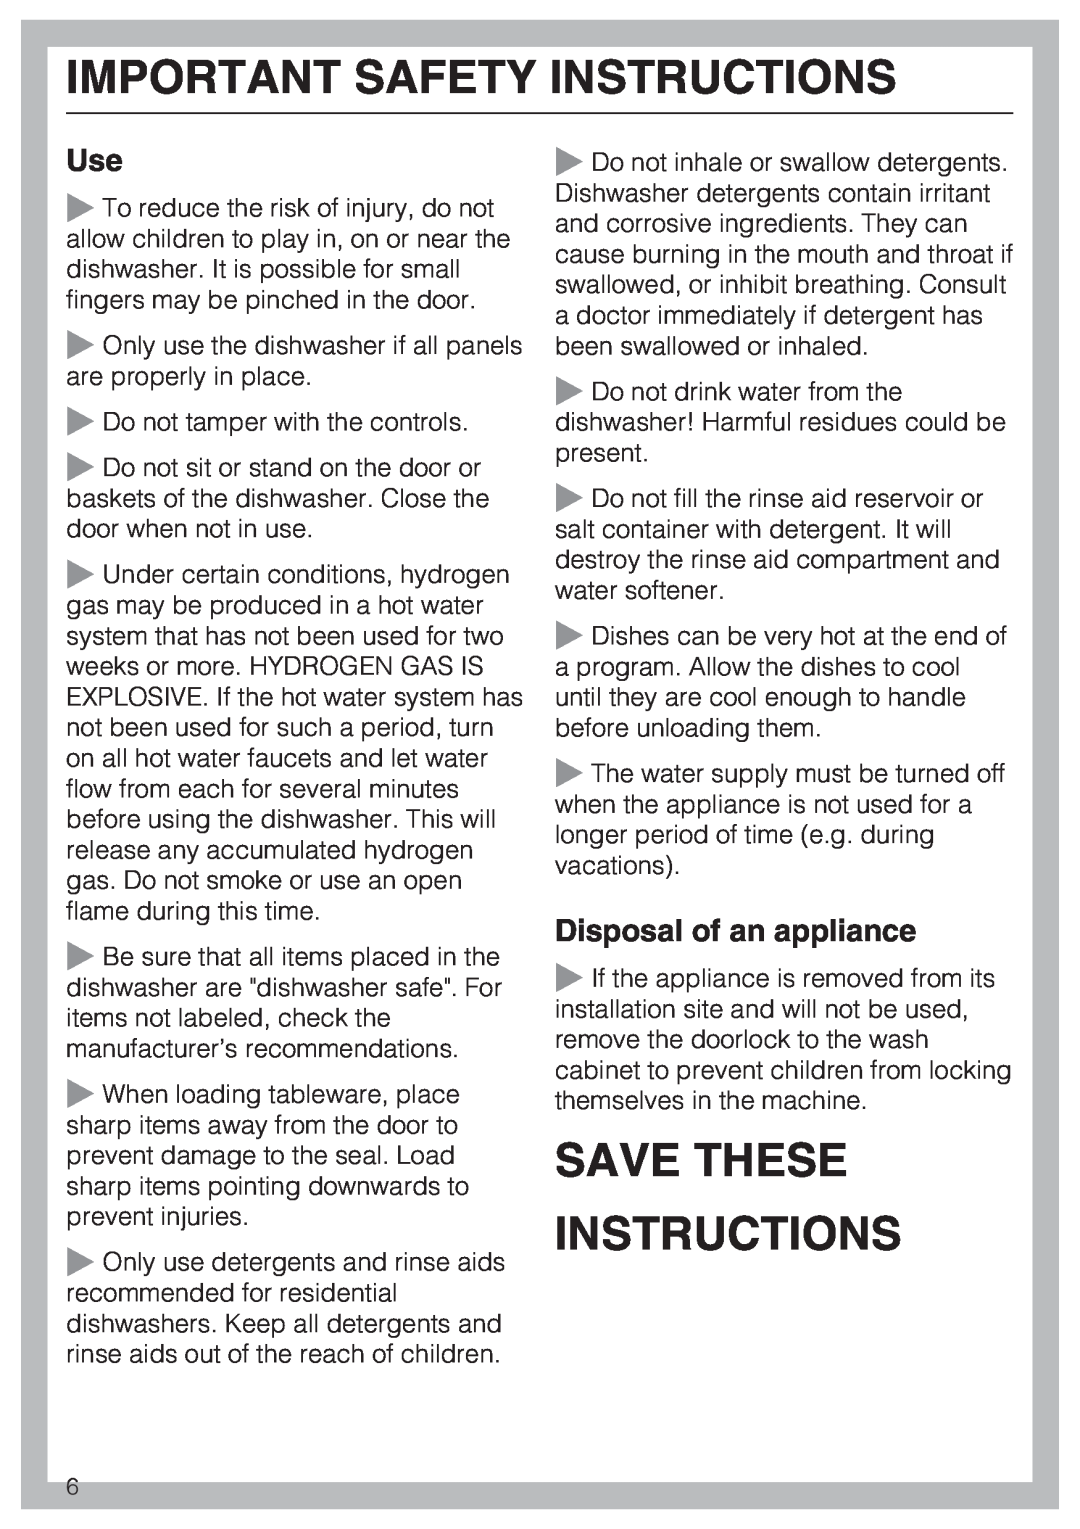 Miele G 4281, G 4286 manual Save These Instructions, Disposal of an appliance, Important Safety Instructions 